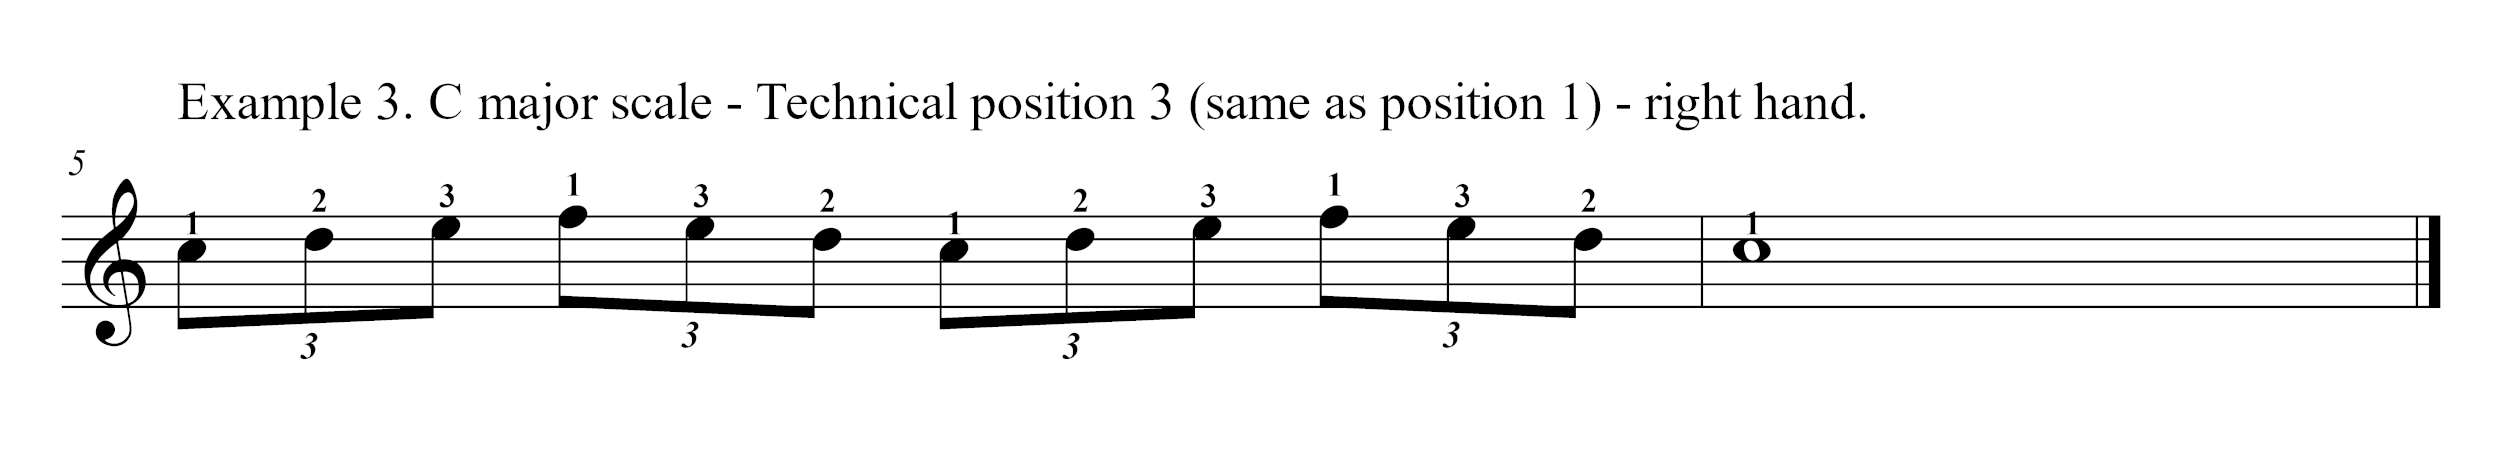 Technical position 3 right hand